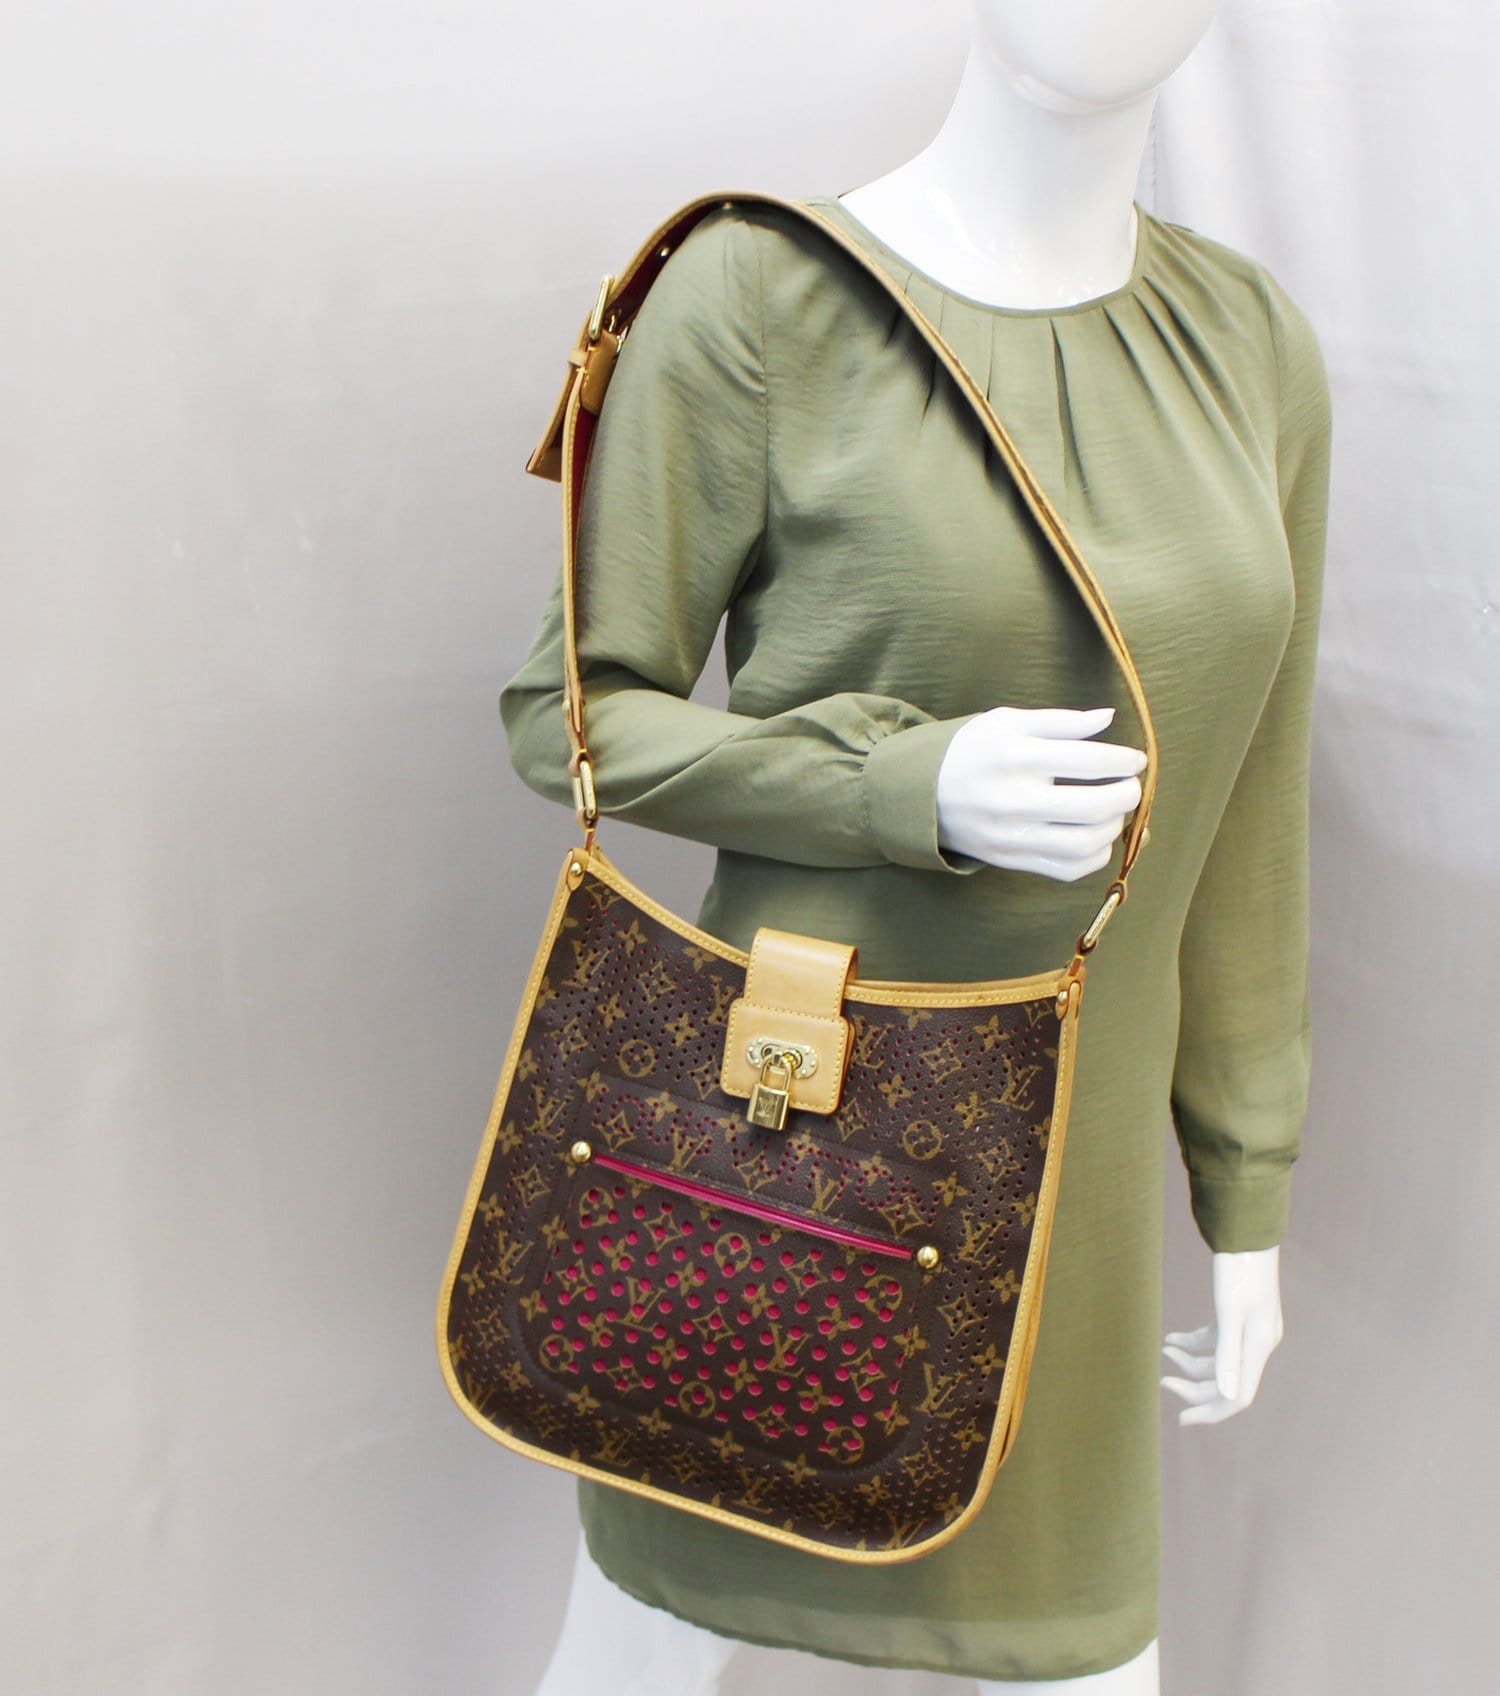 Louis Vuitton pre-owned limited edition perforated Musette shoulder bag